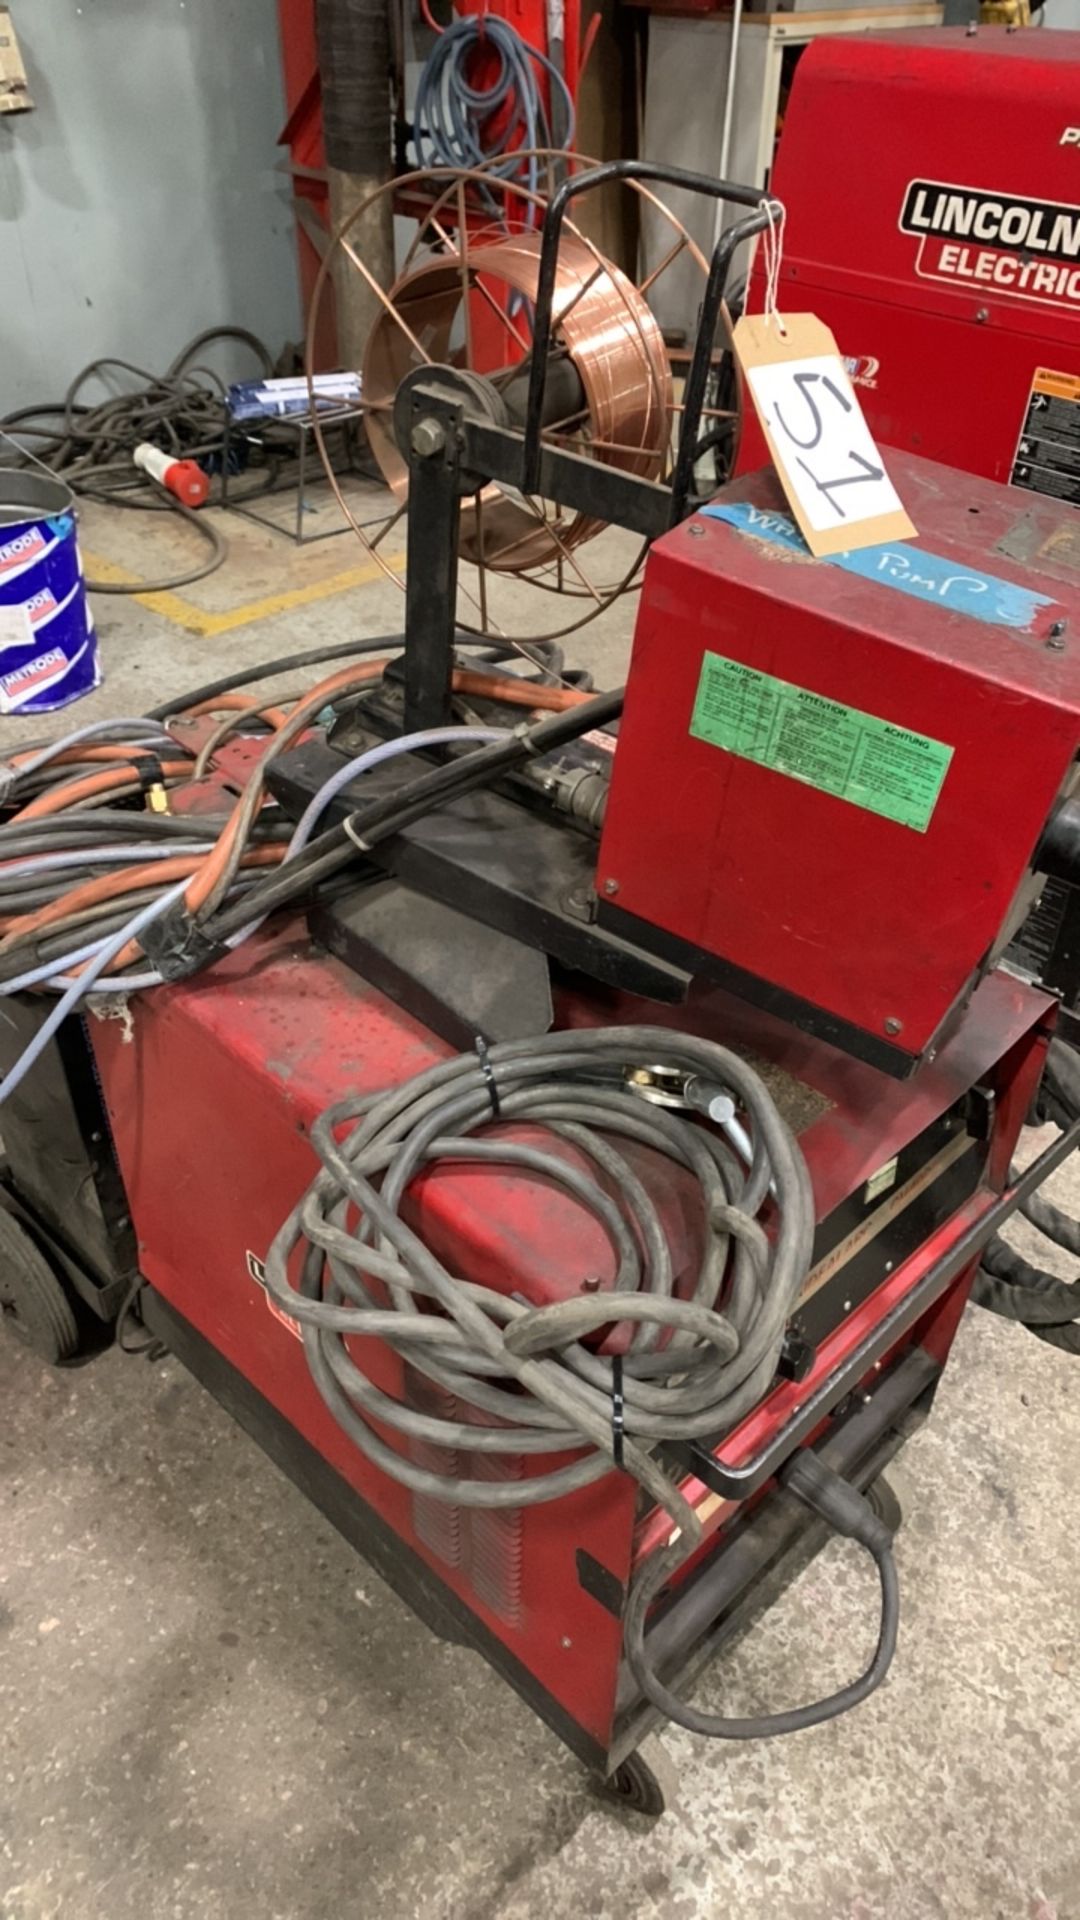 Lincoln Electric Idealarc CV400 Mig Welder Serial No AC-F1950230266 WITH ln -742 Wire Feed Unit - Image 4 of 4